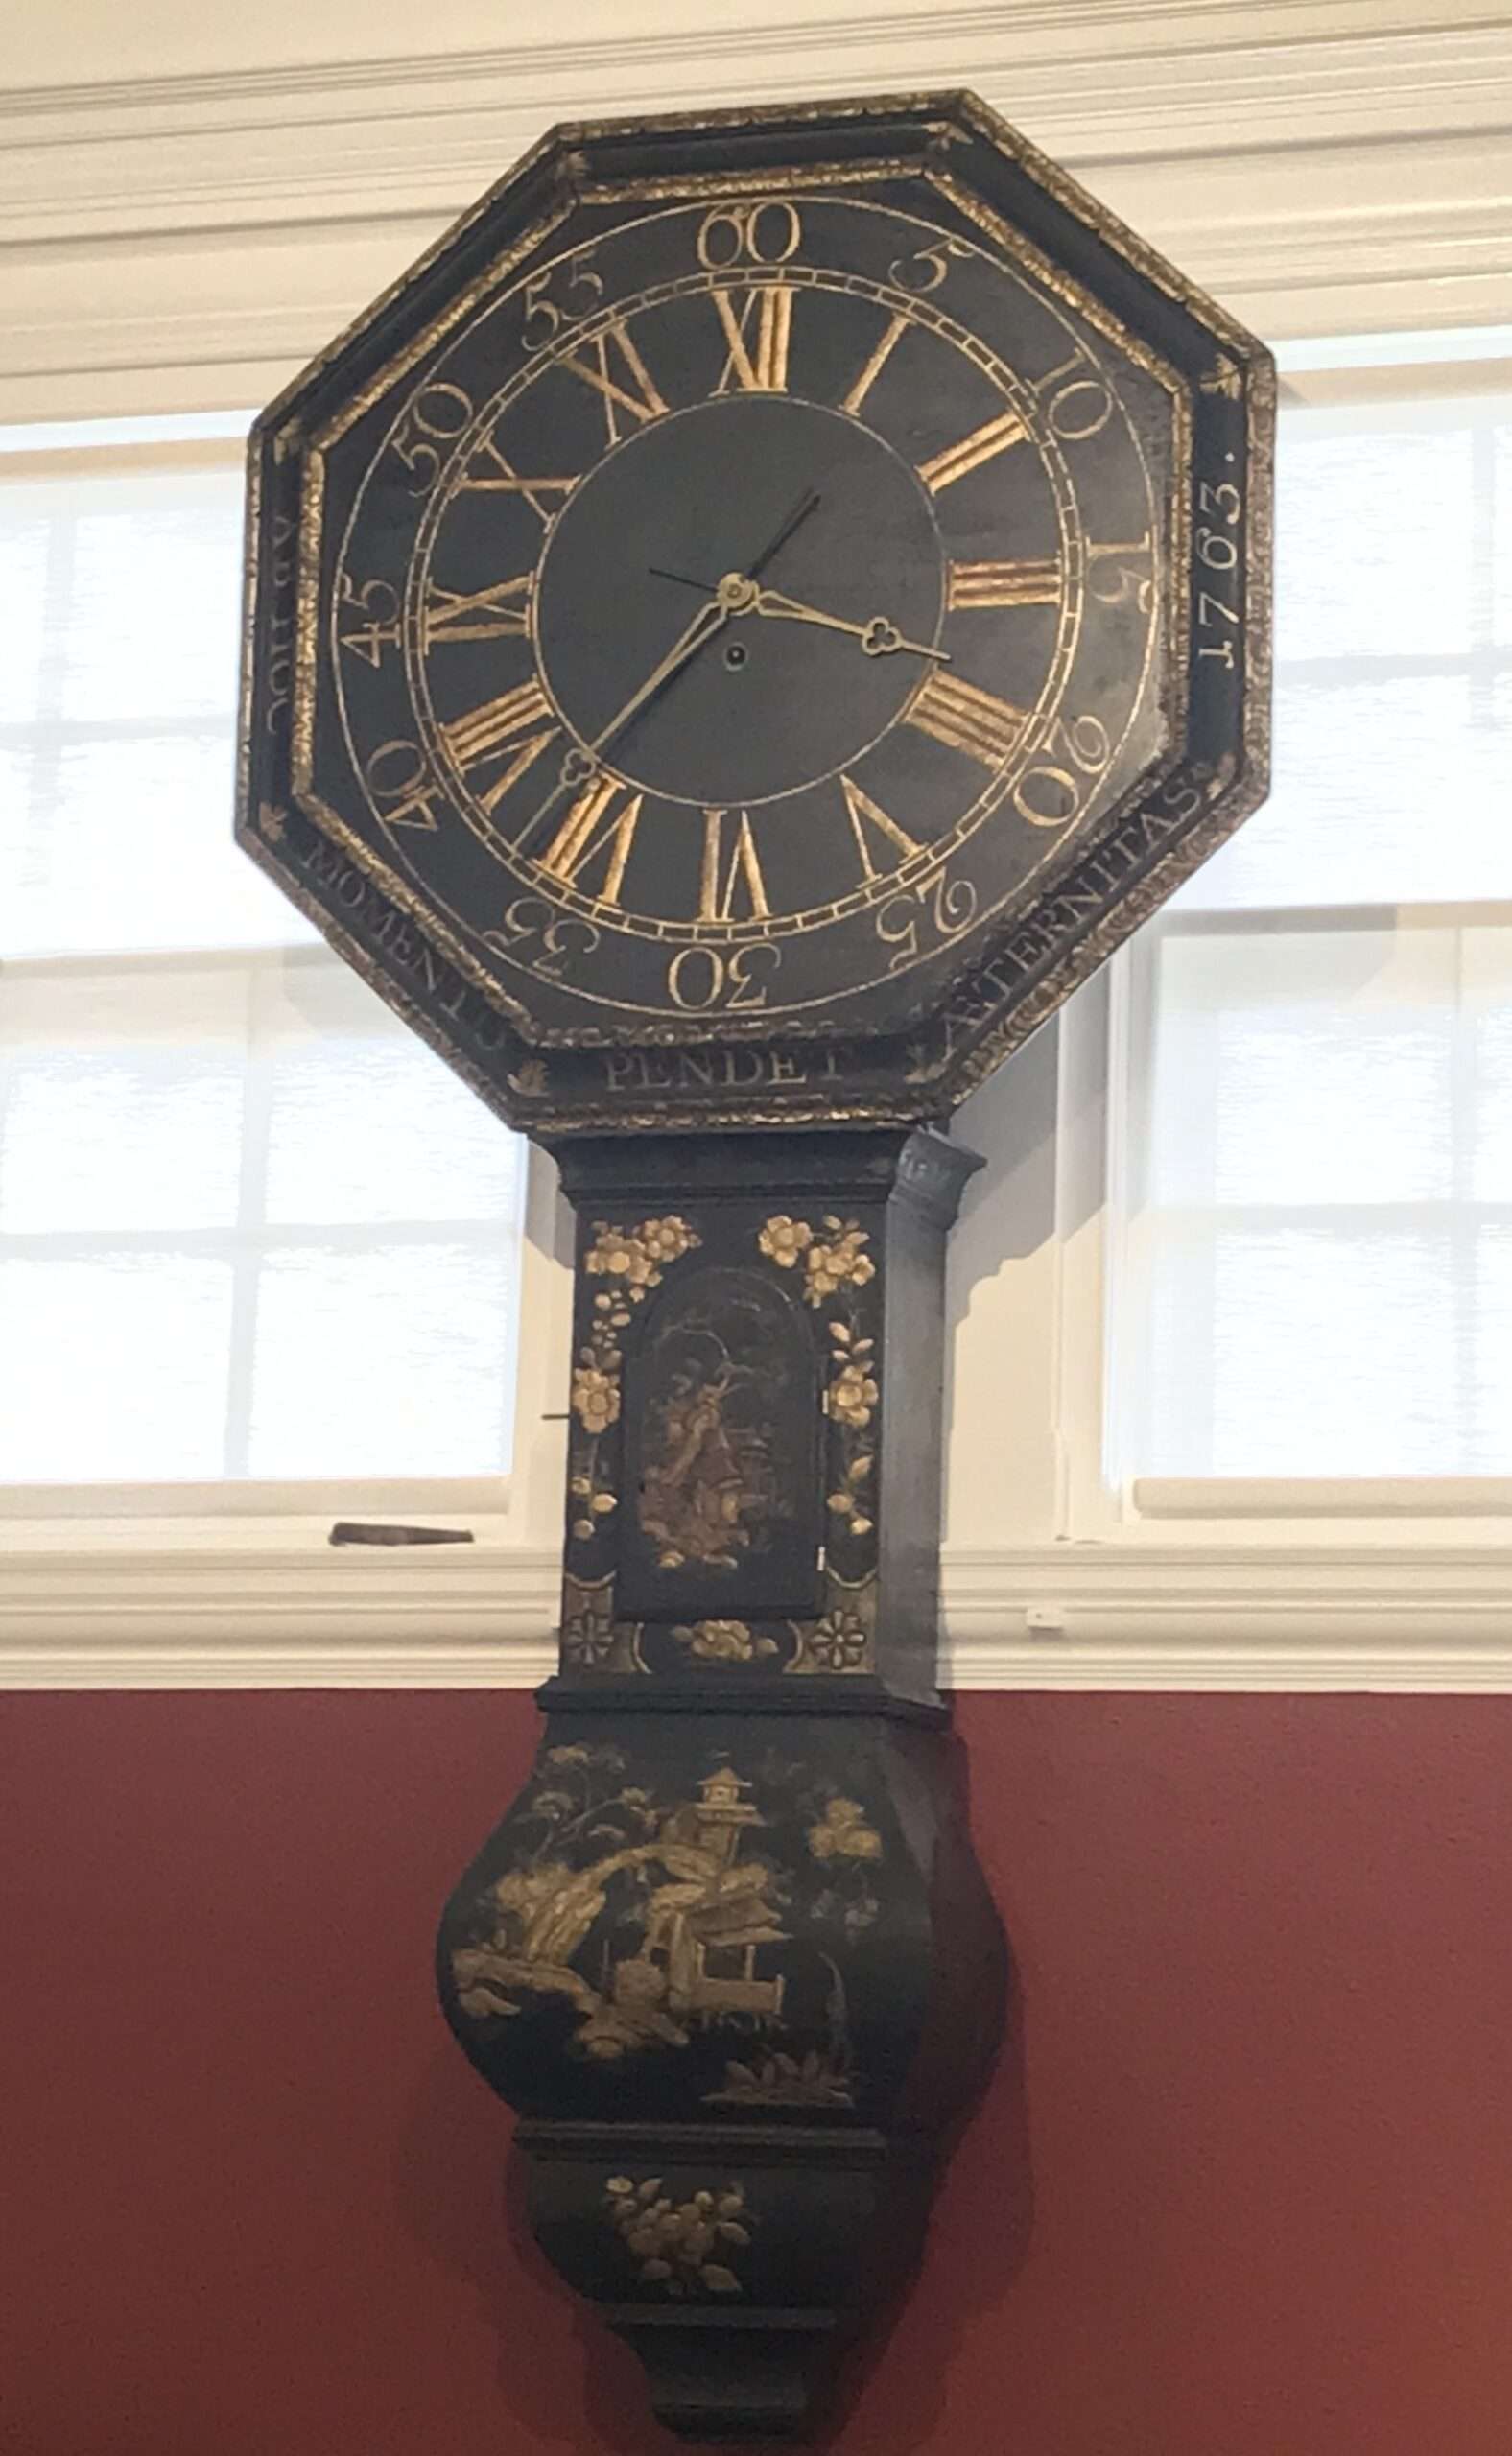 Rare and unusual clocks are among those on display in the galleries.